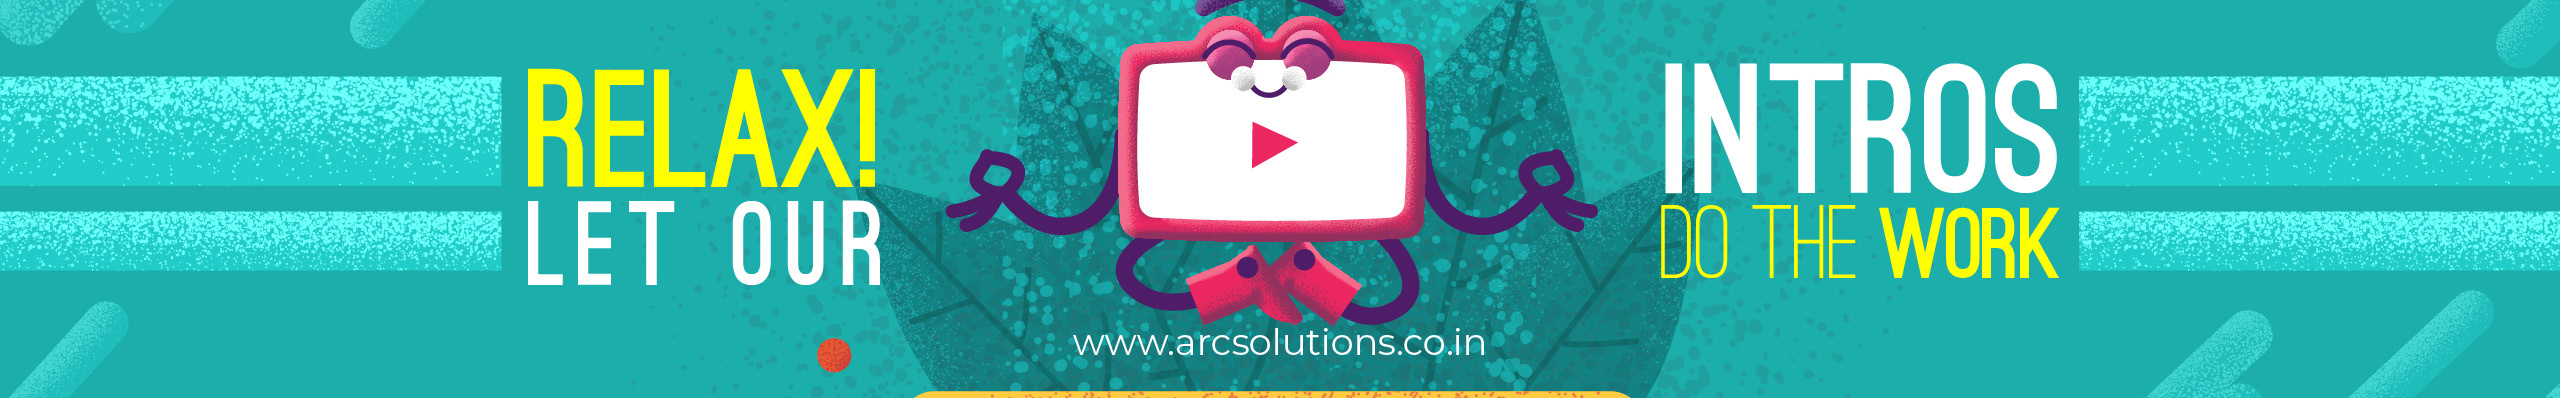 Arc Solutions's profile banner